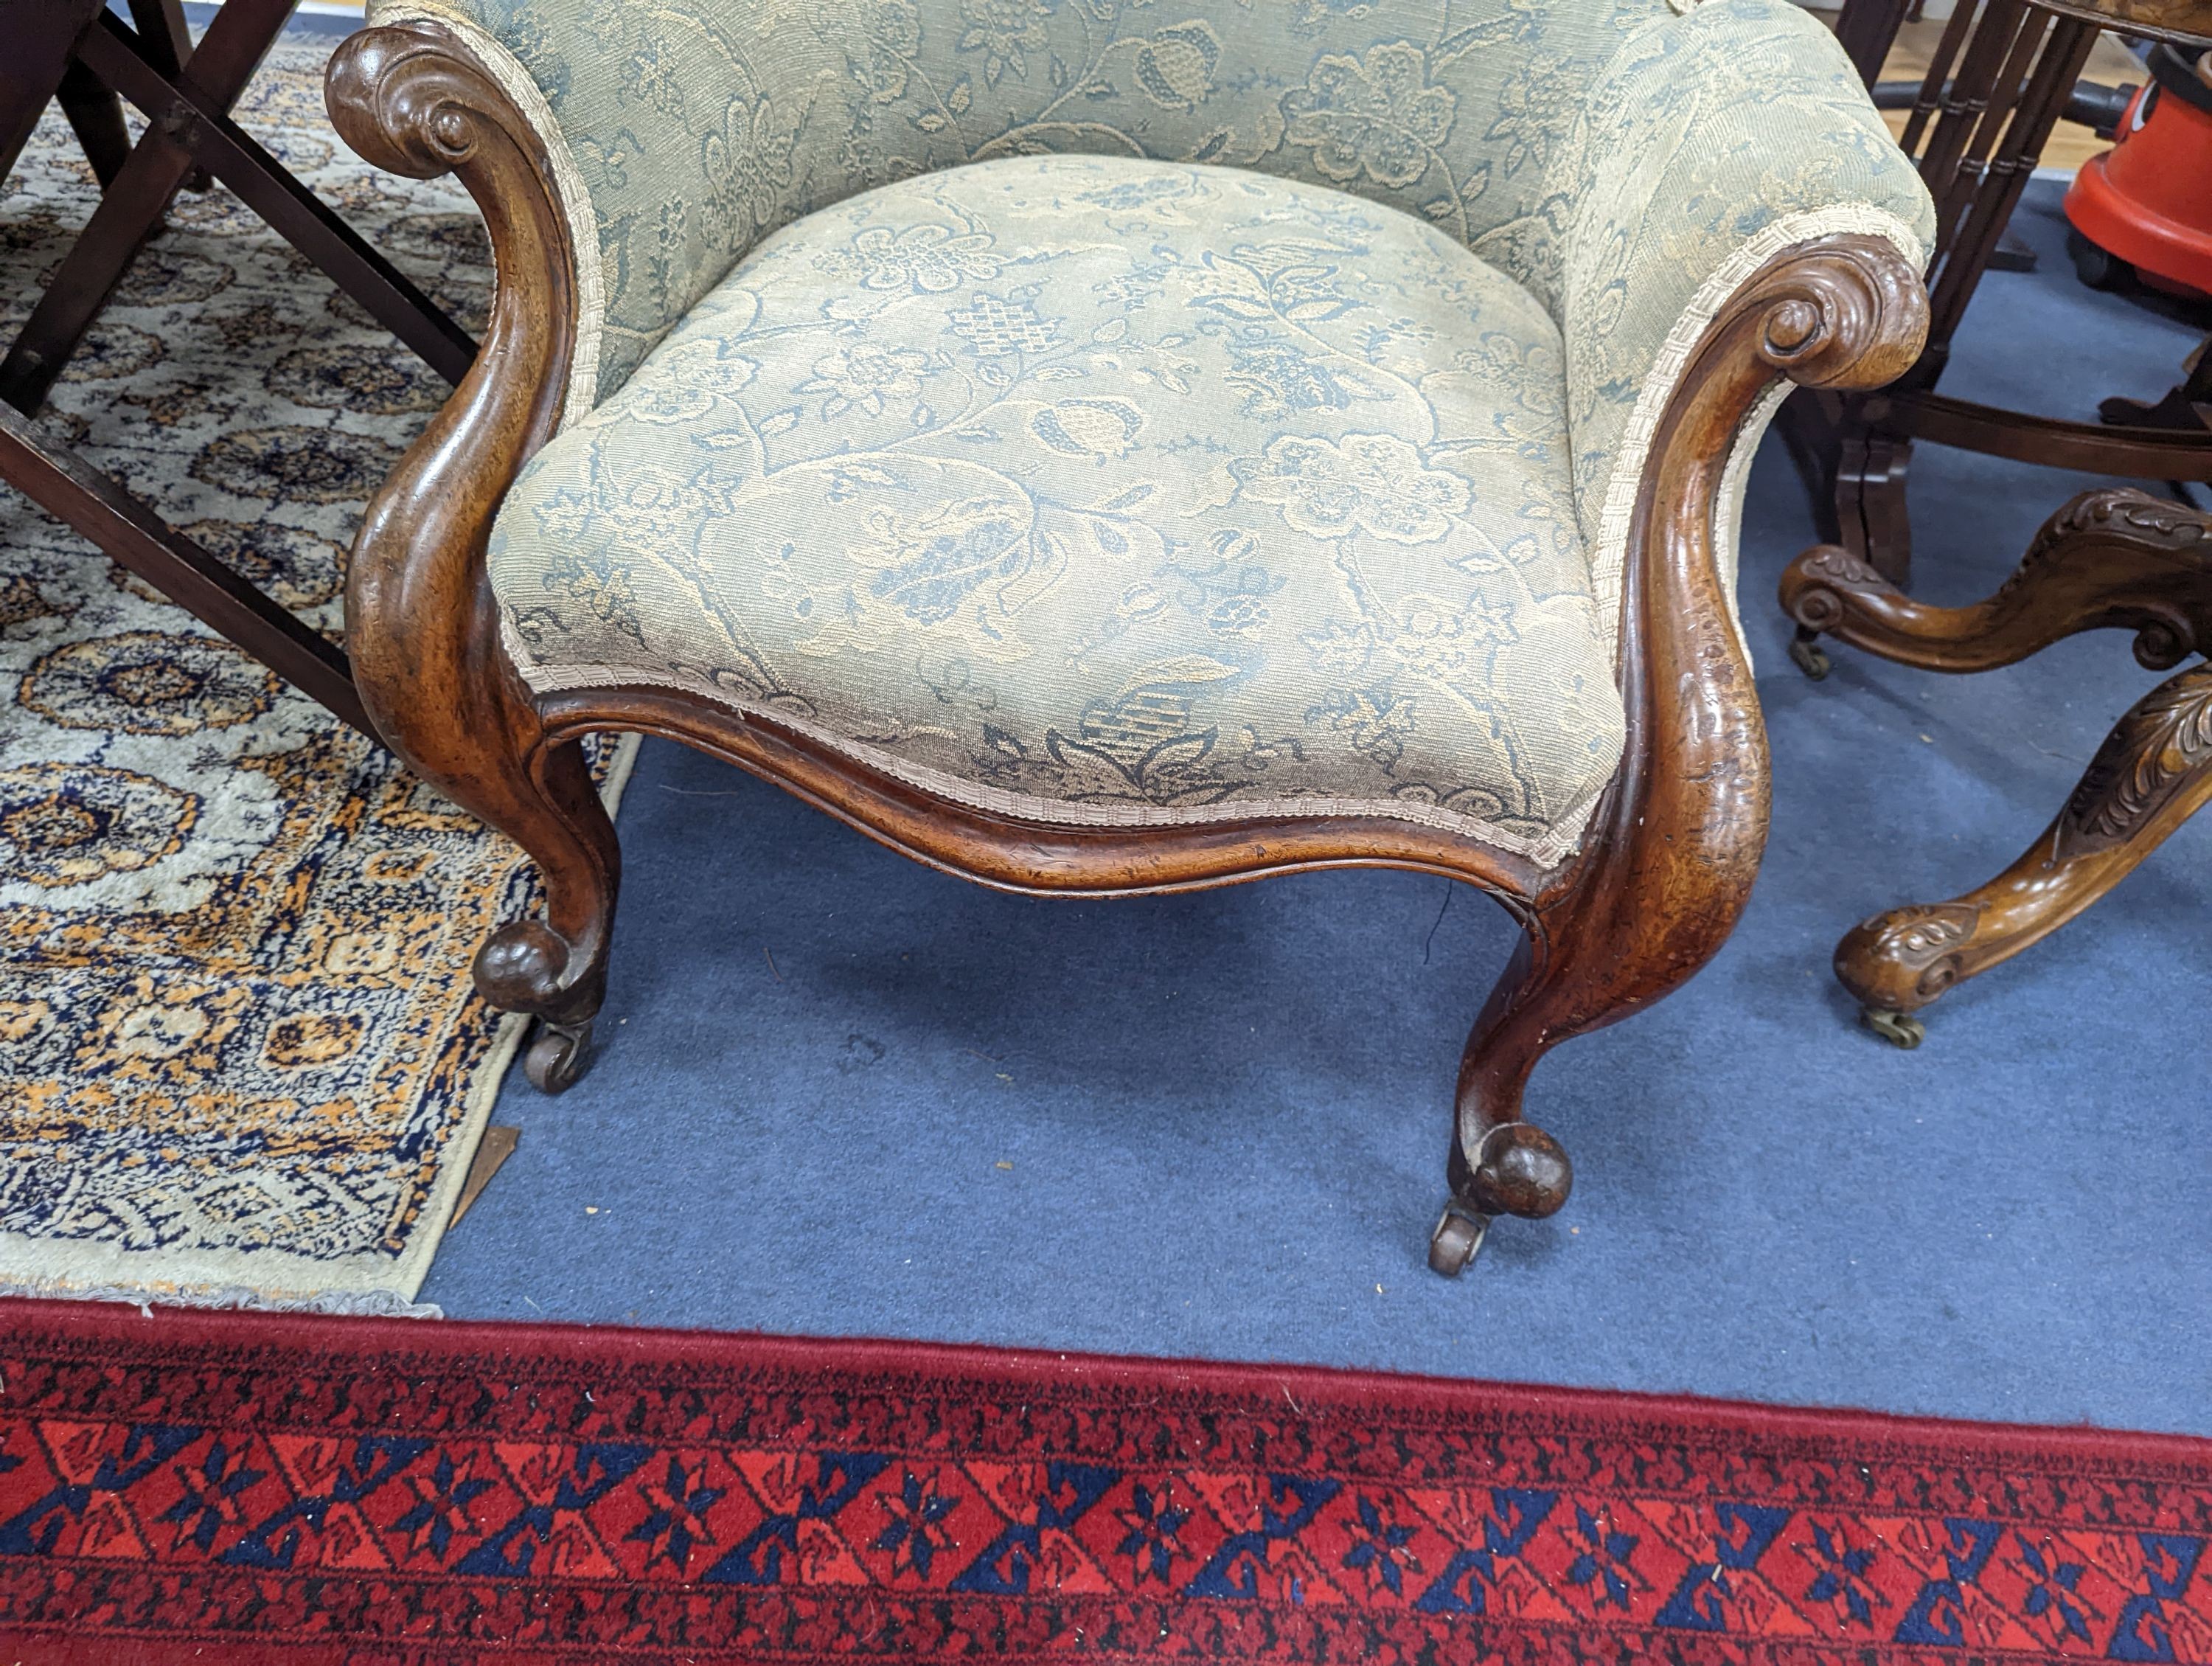 An upholstered Victorian armchair